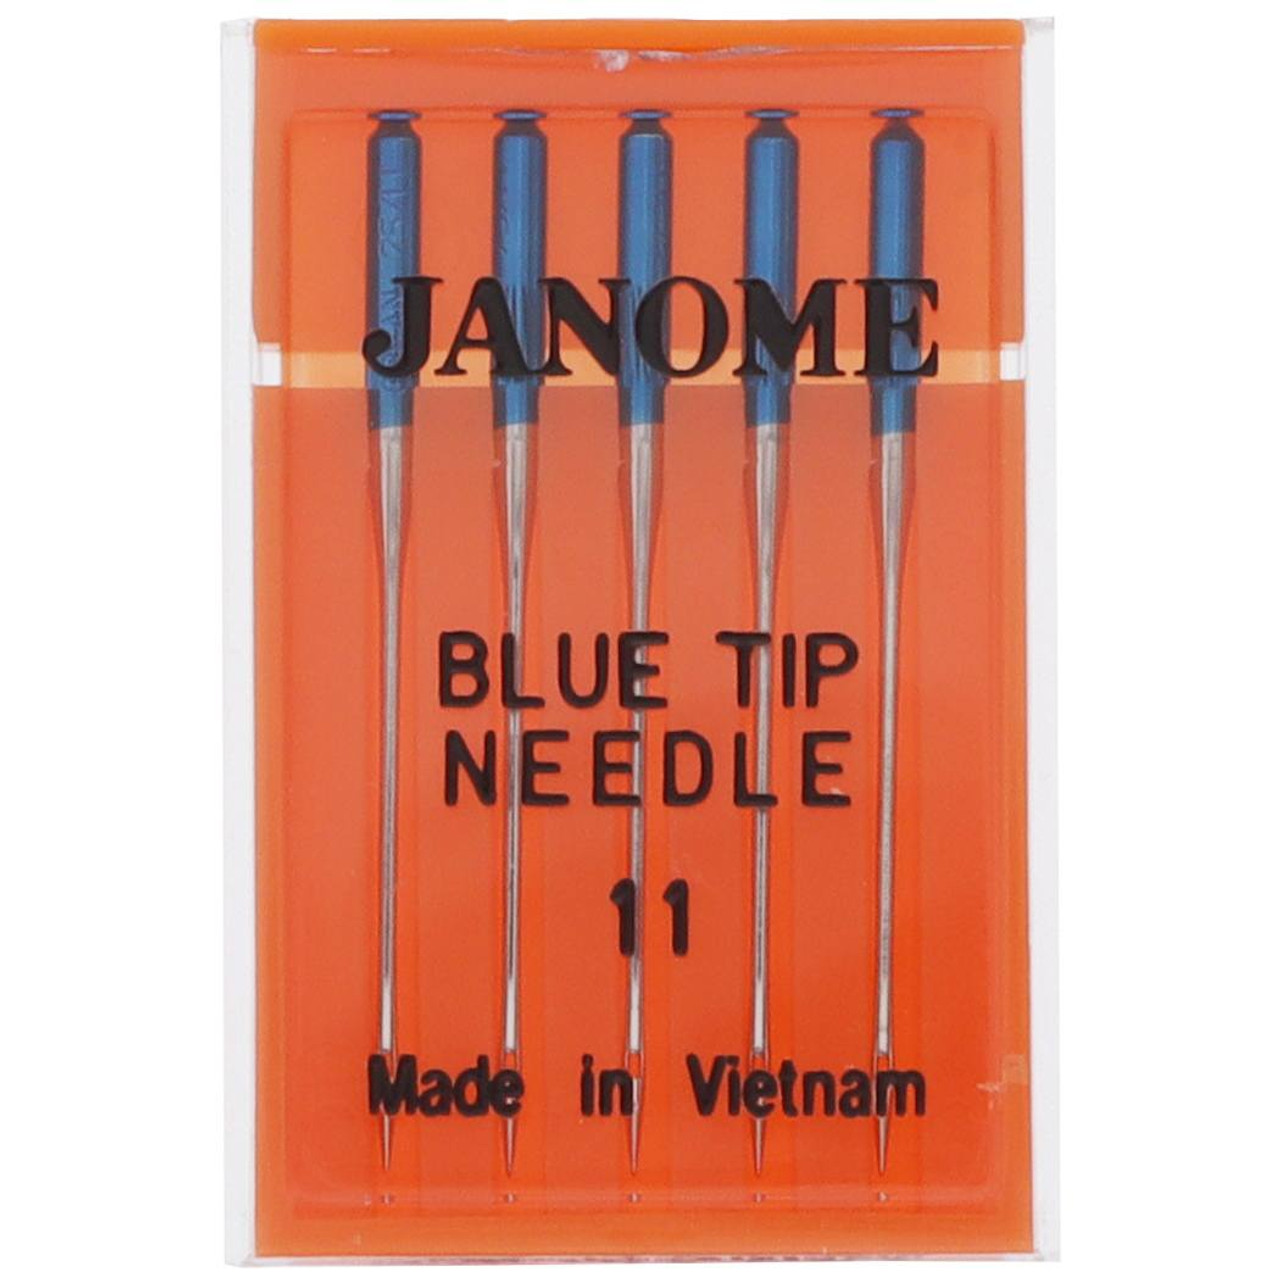 HONEYSEW Sewing Machine Blue Tip Needle Size 11 Purple Tip Needles Designed  for Janome Stretch Size14